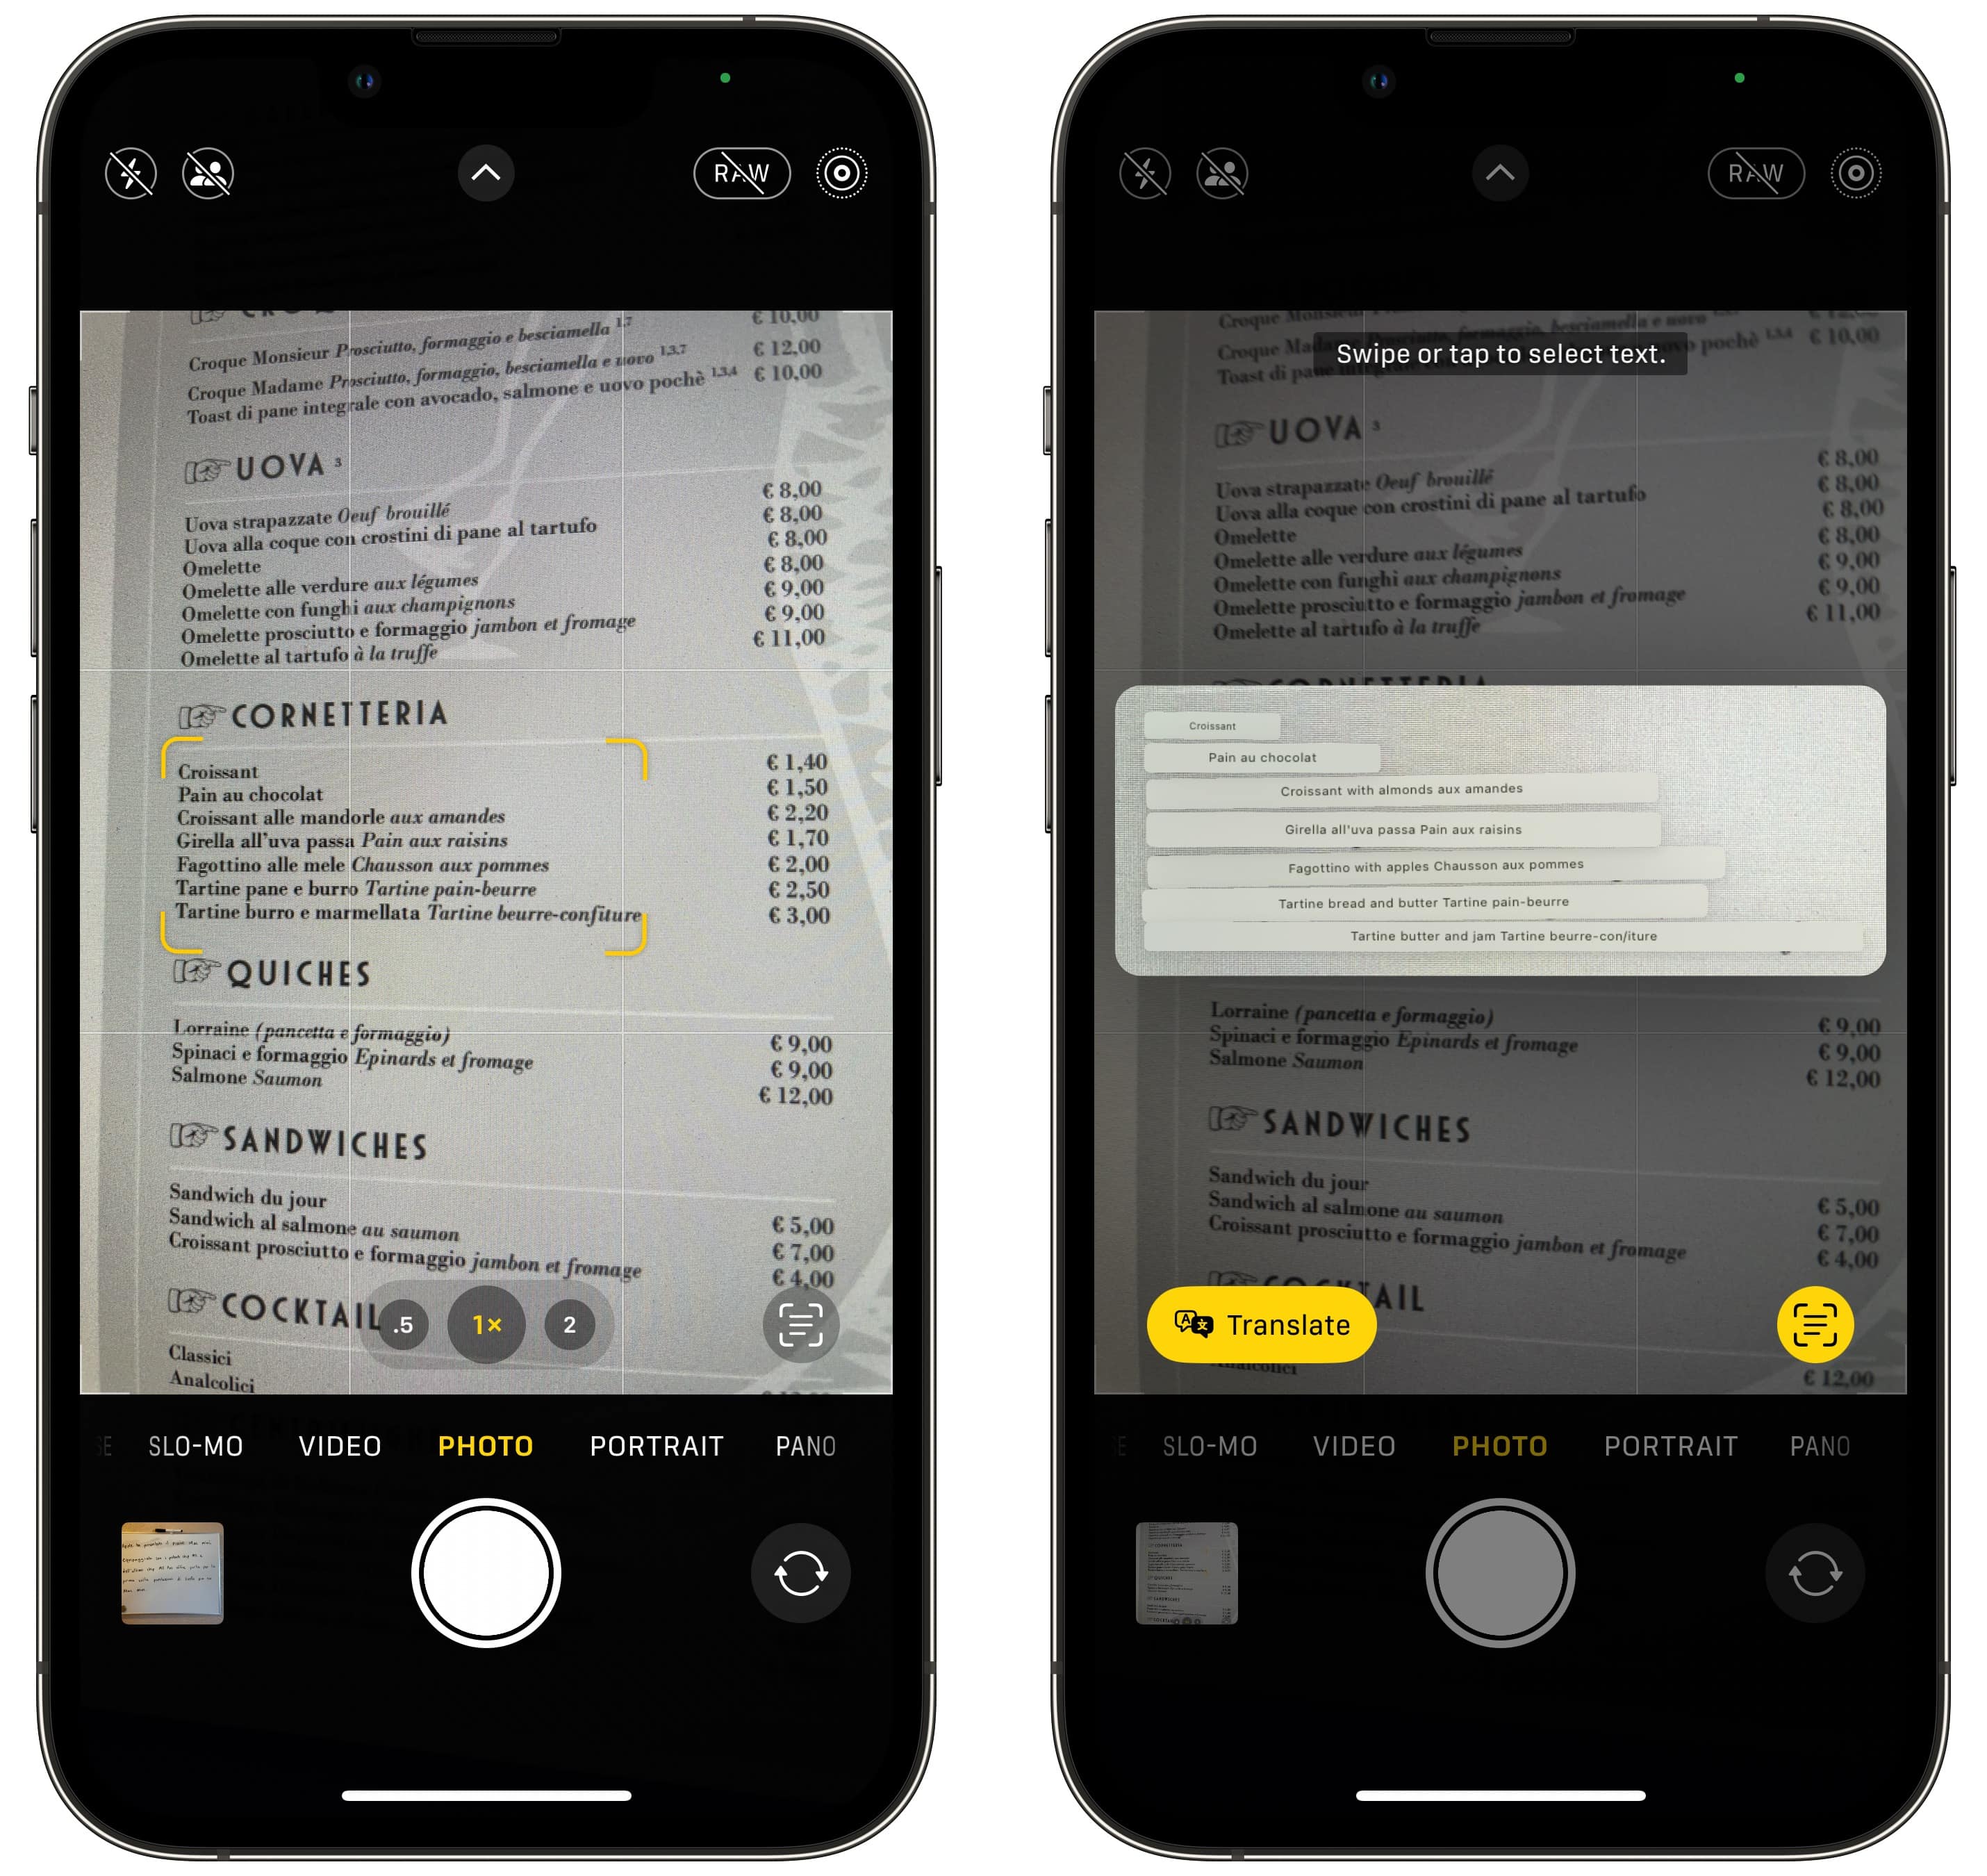 Translating a menu from the iPhone camera app